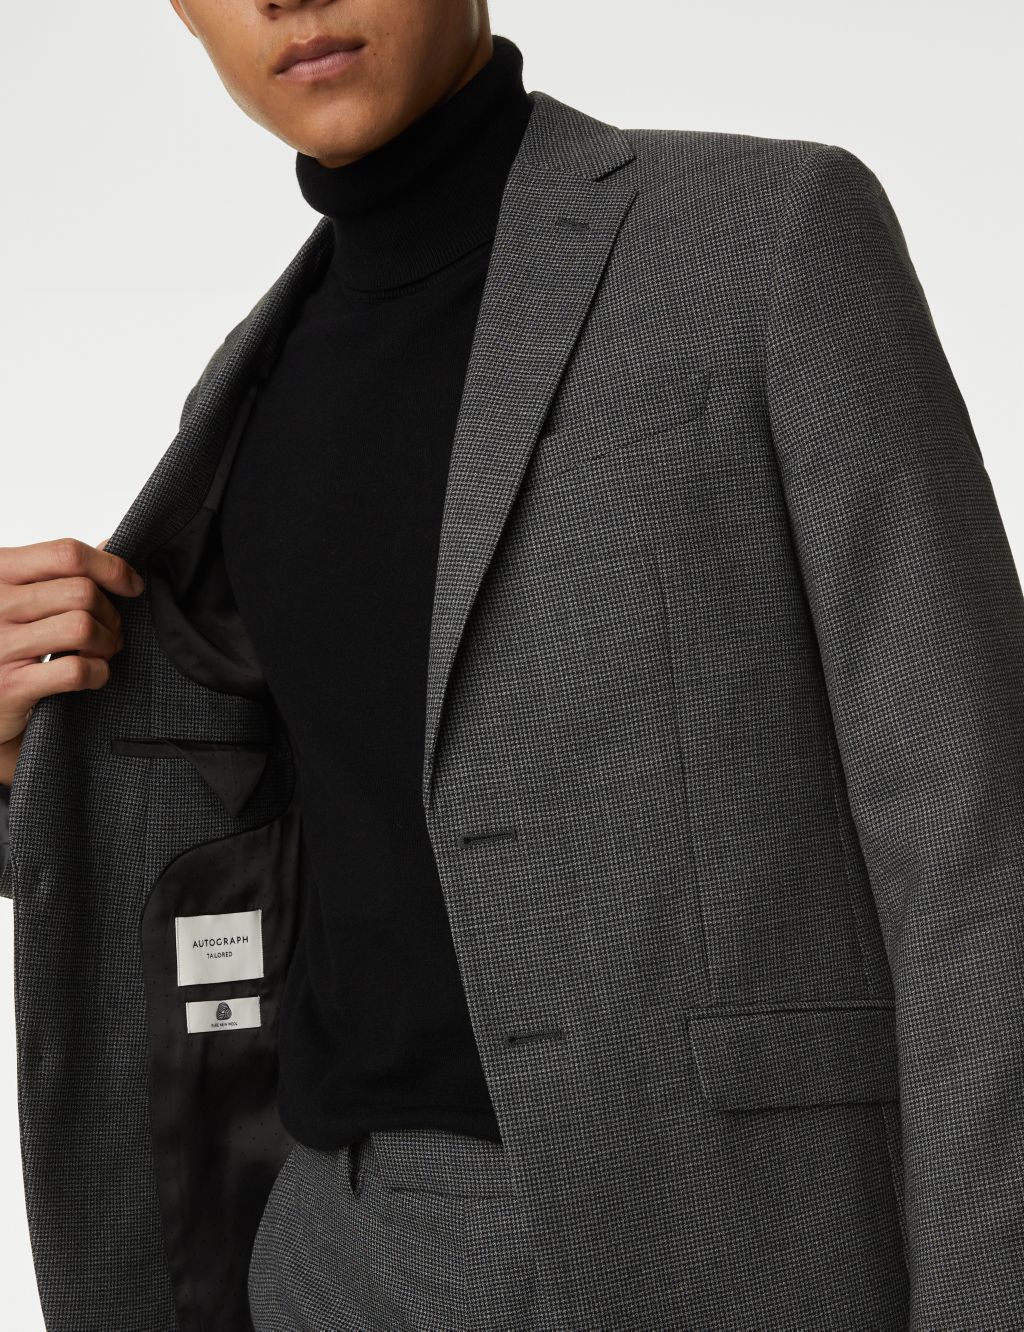 Tailored Fit Wool Blend Suit Jacket image 6